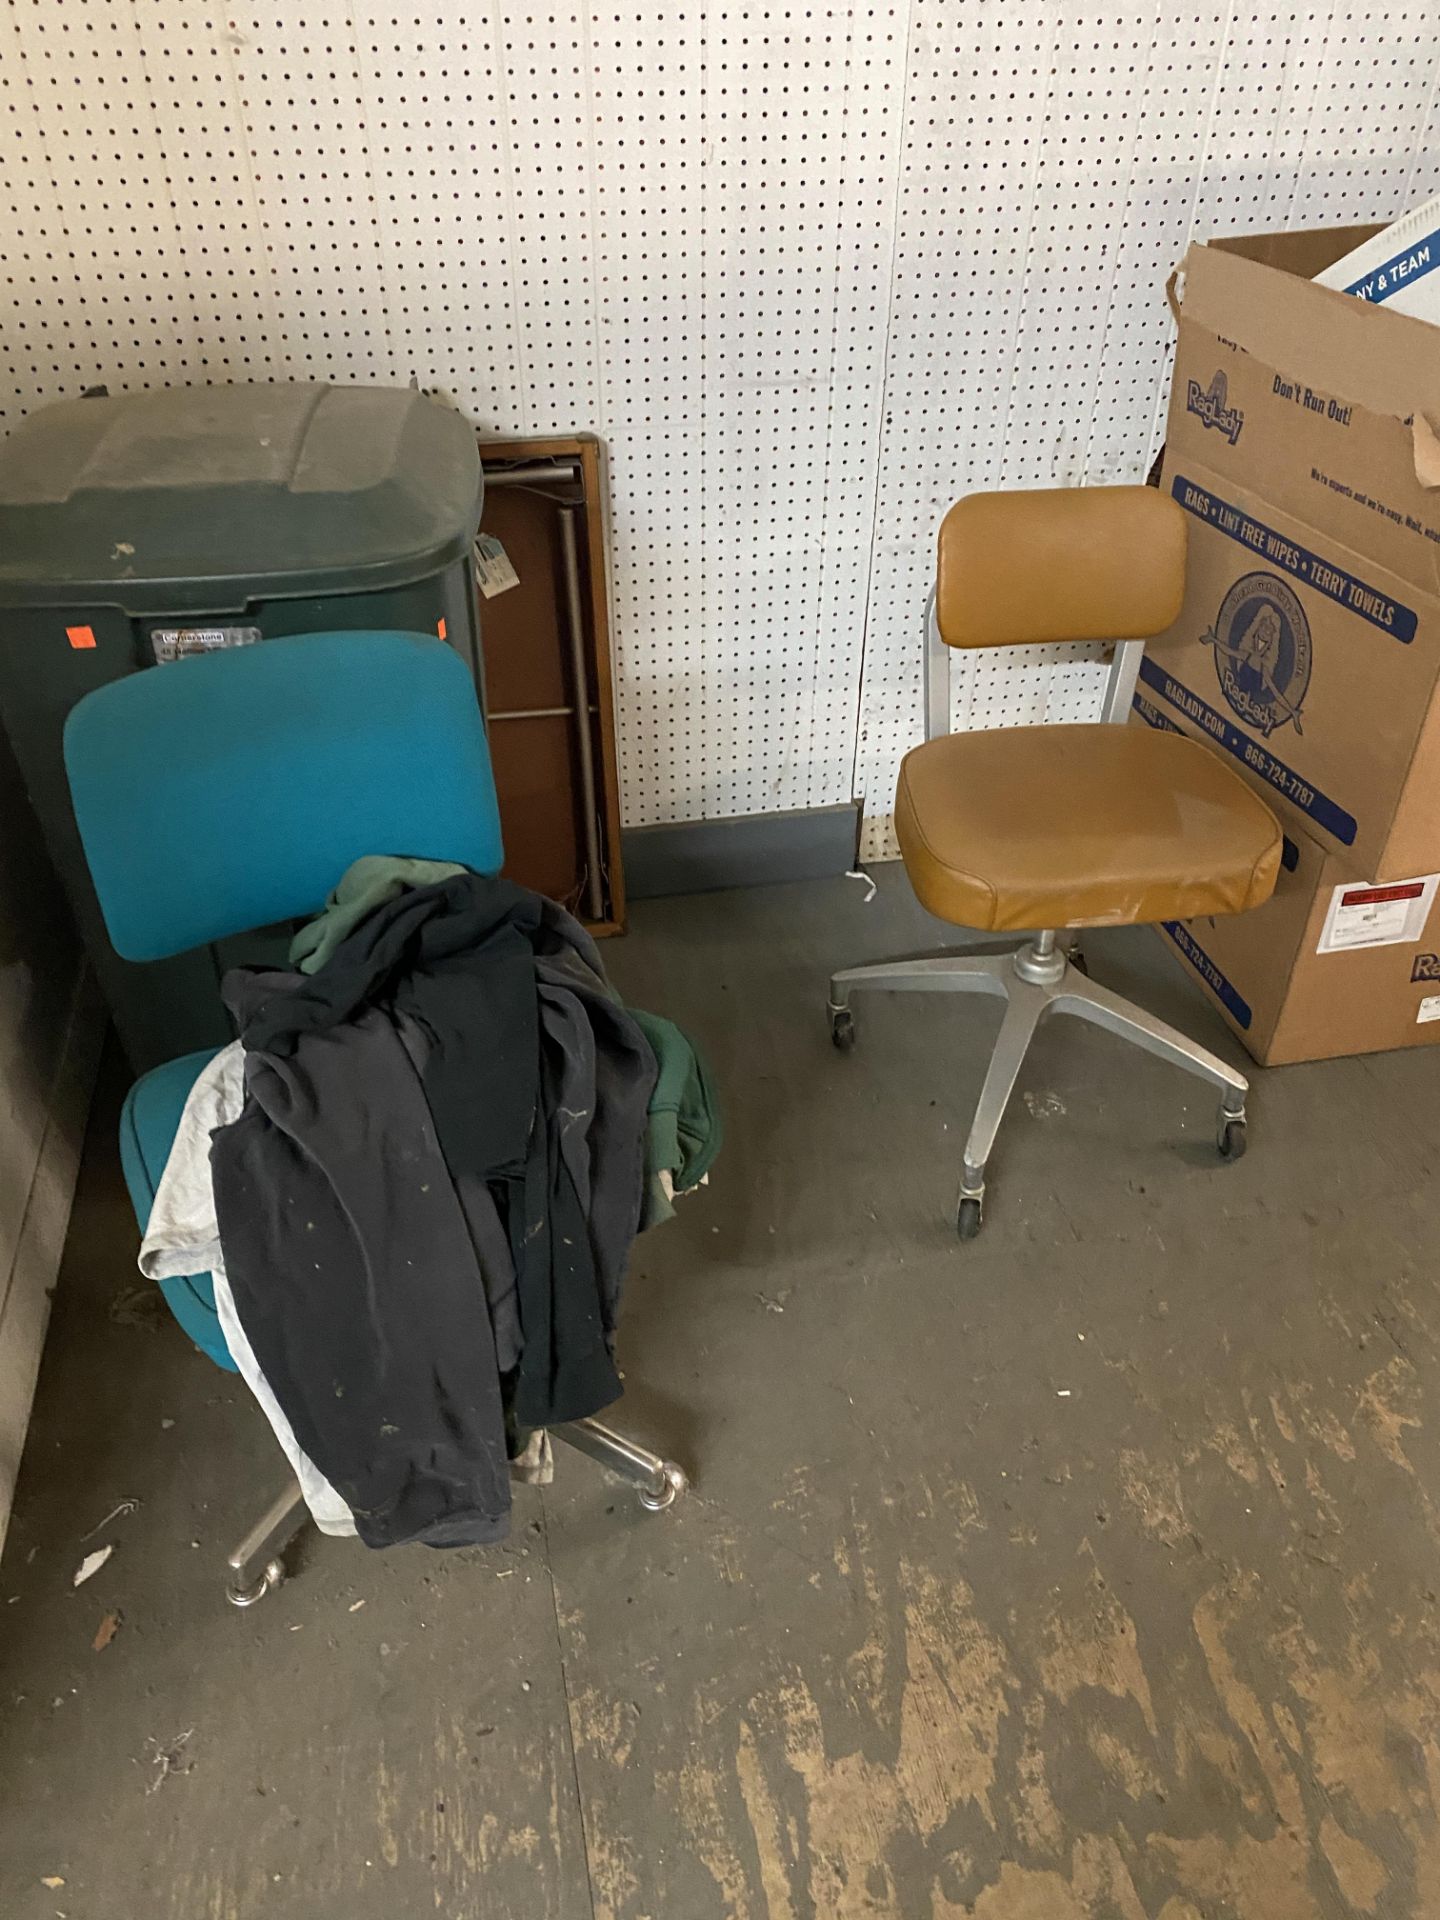 (Lot) 10 Asst. Chairs, c/o: Folding, Office Chairs In Warehouse - Image 2 of 5